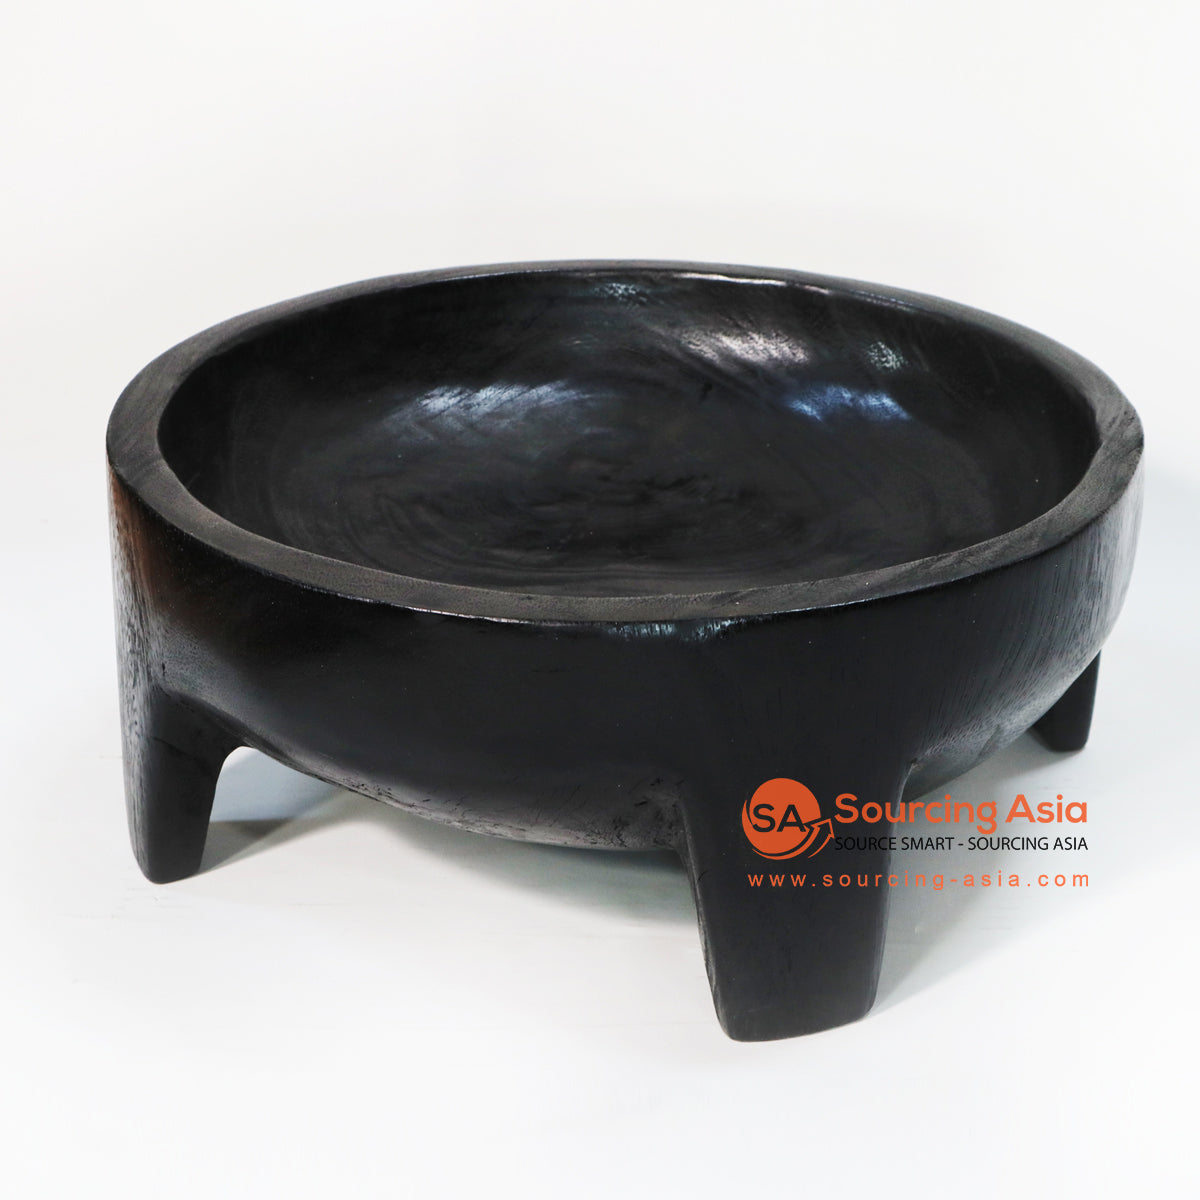 BMWC017 BLACK SUAR WOOD TRIBAL STYLE ROUND BOWL WITH LEGS